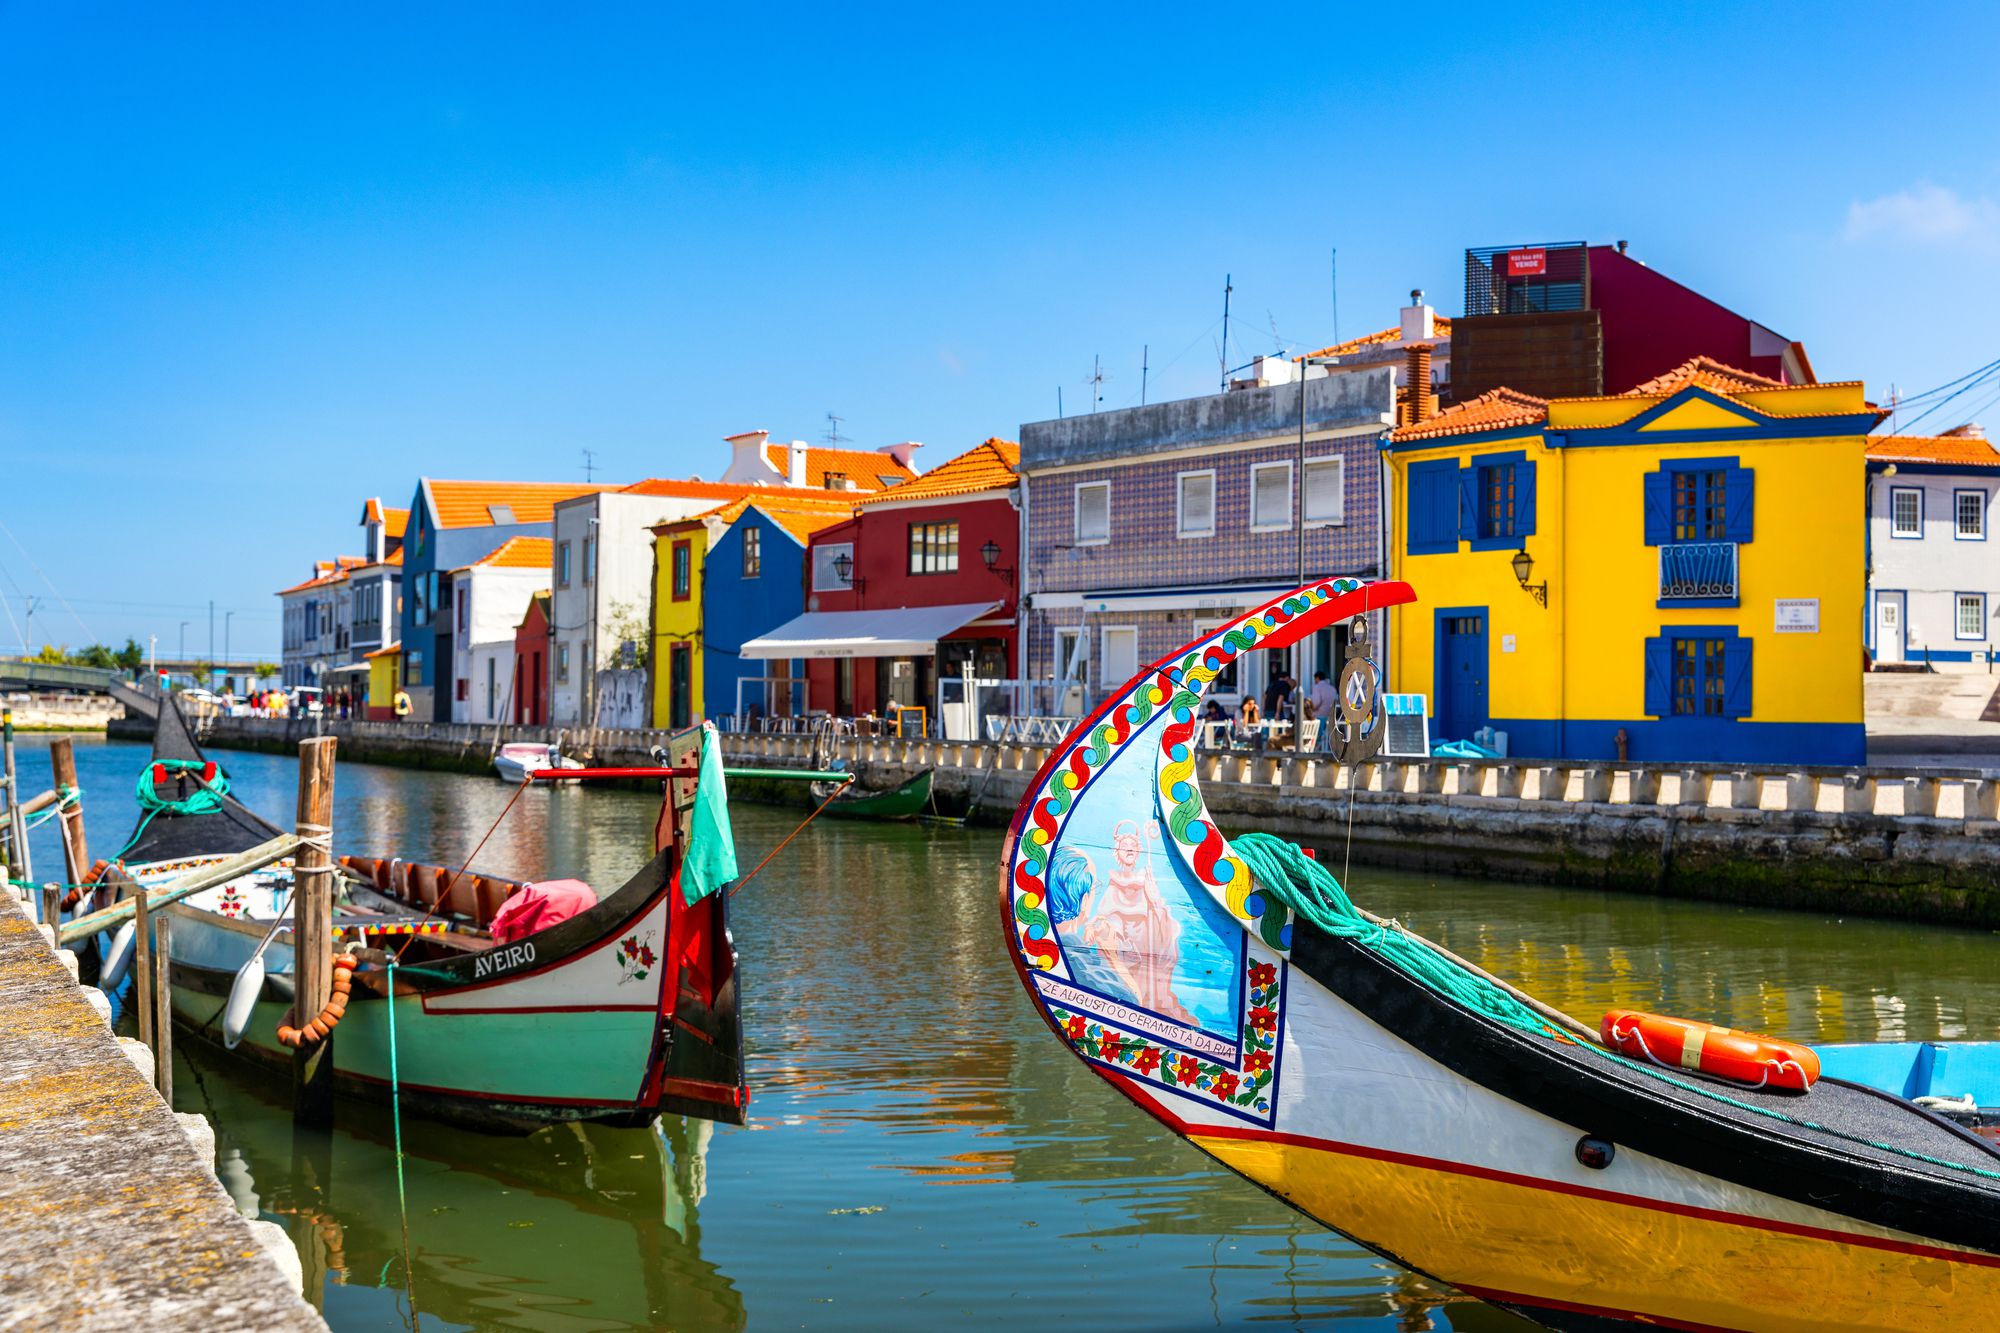 <p>The locals in Aveiro are welcoming and friendly, making it easy to make friends in this beautiful coastal town. Aveiro is a great location for families looking for a quieter, smaller city to call home. The city is also an ideal destination for ocean lovers who prefer to live in areas that are not too touristy.</p><p>Getting around the city on foot or by bicycle is easy since the city does not have many hills. Although Aveiro is known as the Venice of Portugal, it is not as busy or congested as many other coastal cities. This makes it a very popular place for people to settle down and enjoy a quieter life, while still experiencing city life.</p>